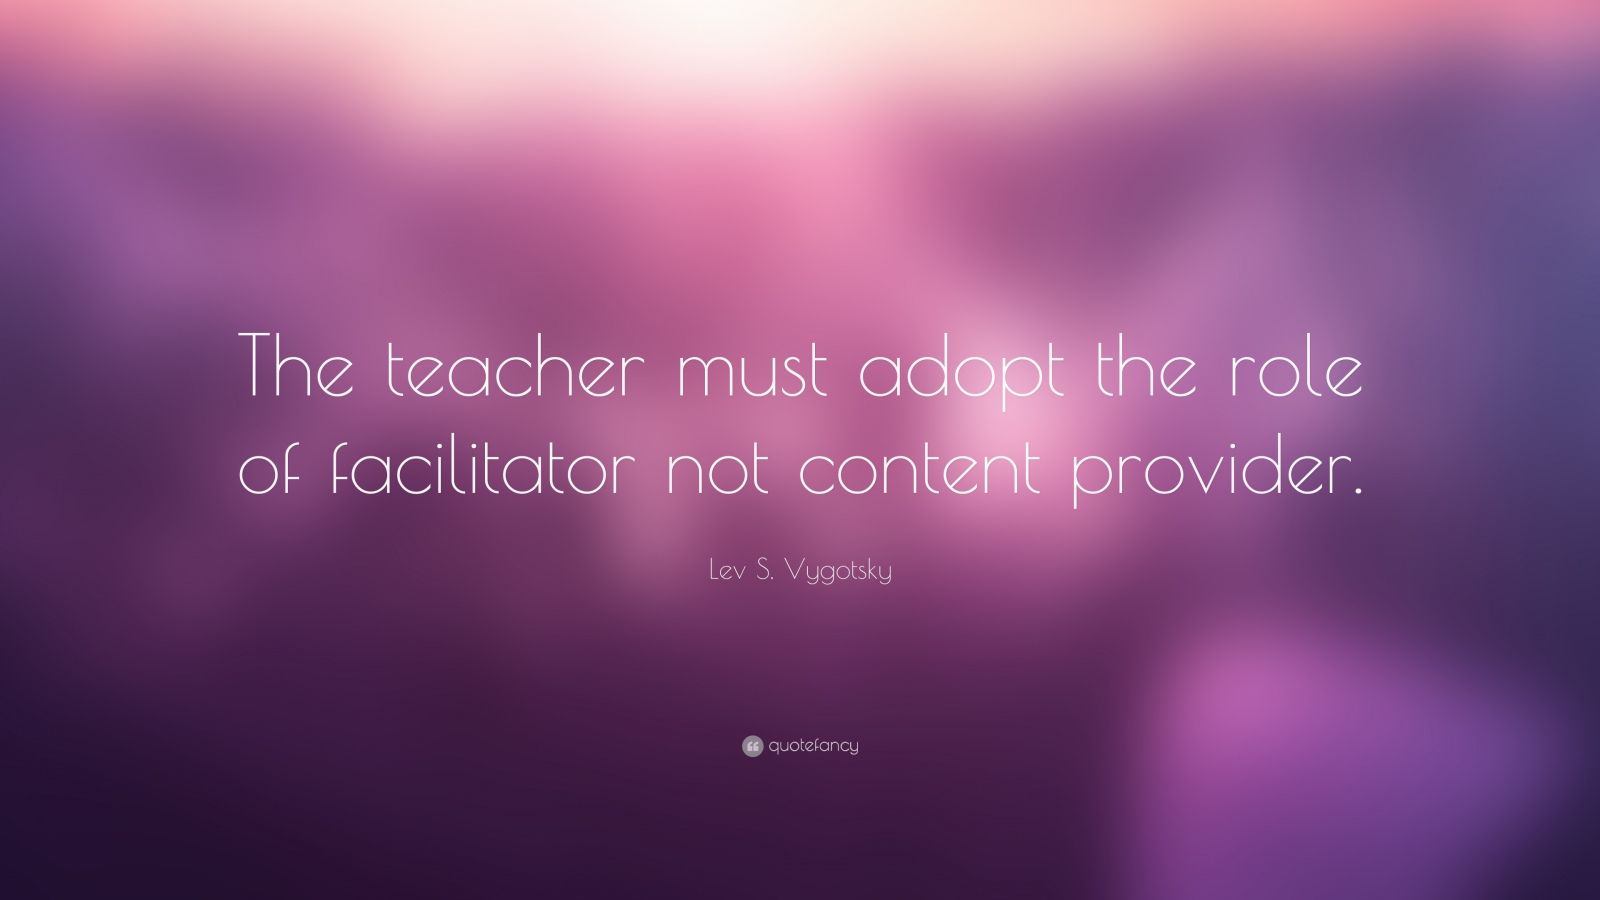 Lev S. Vygotsky Quote: 